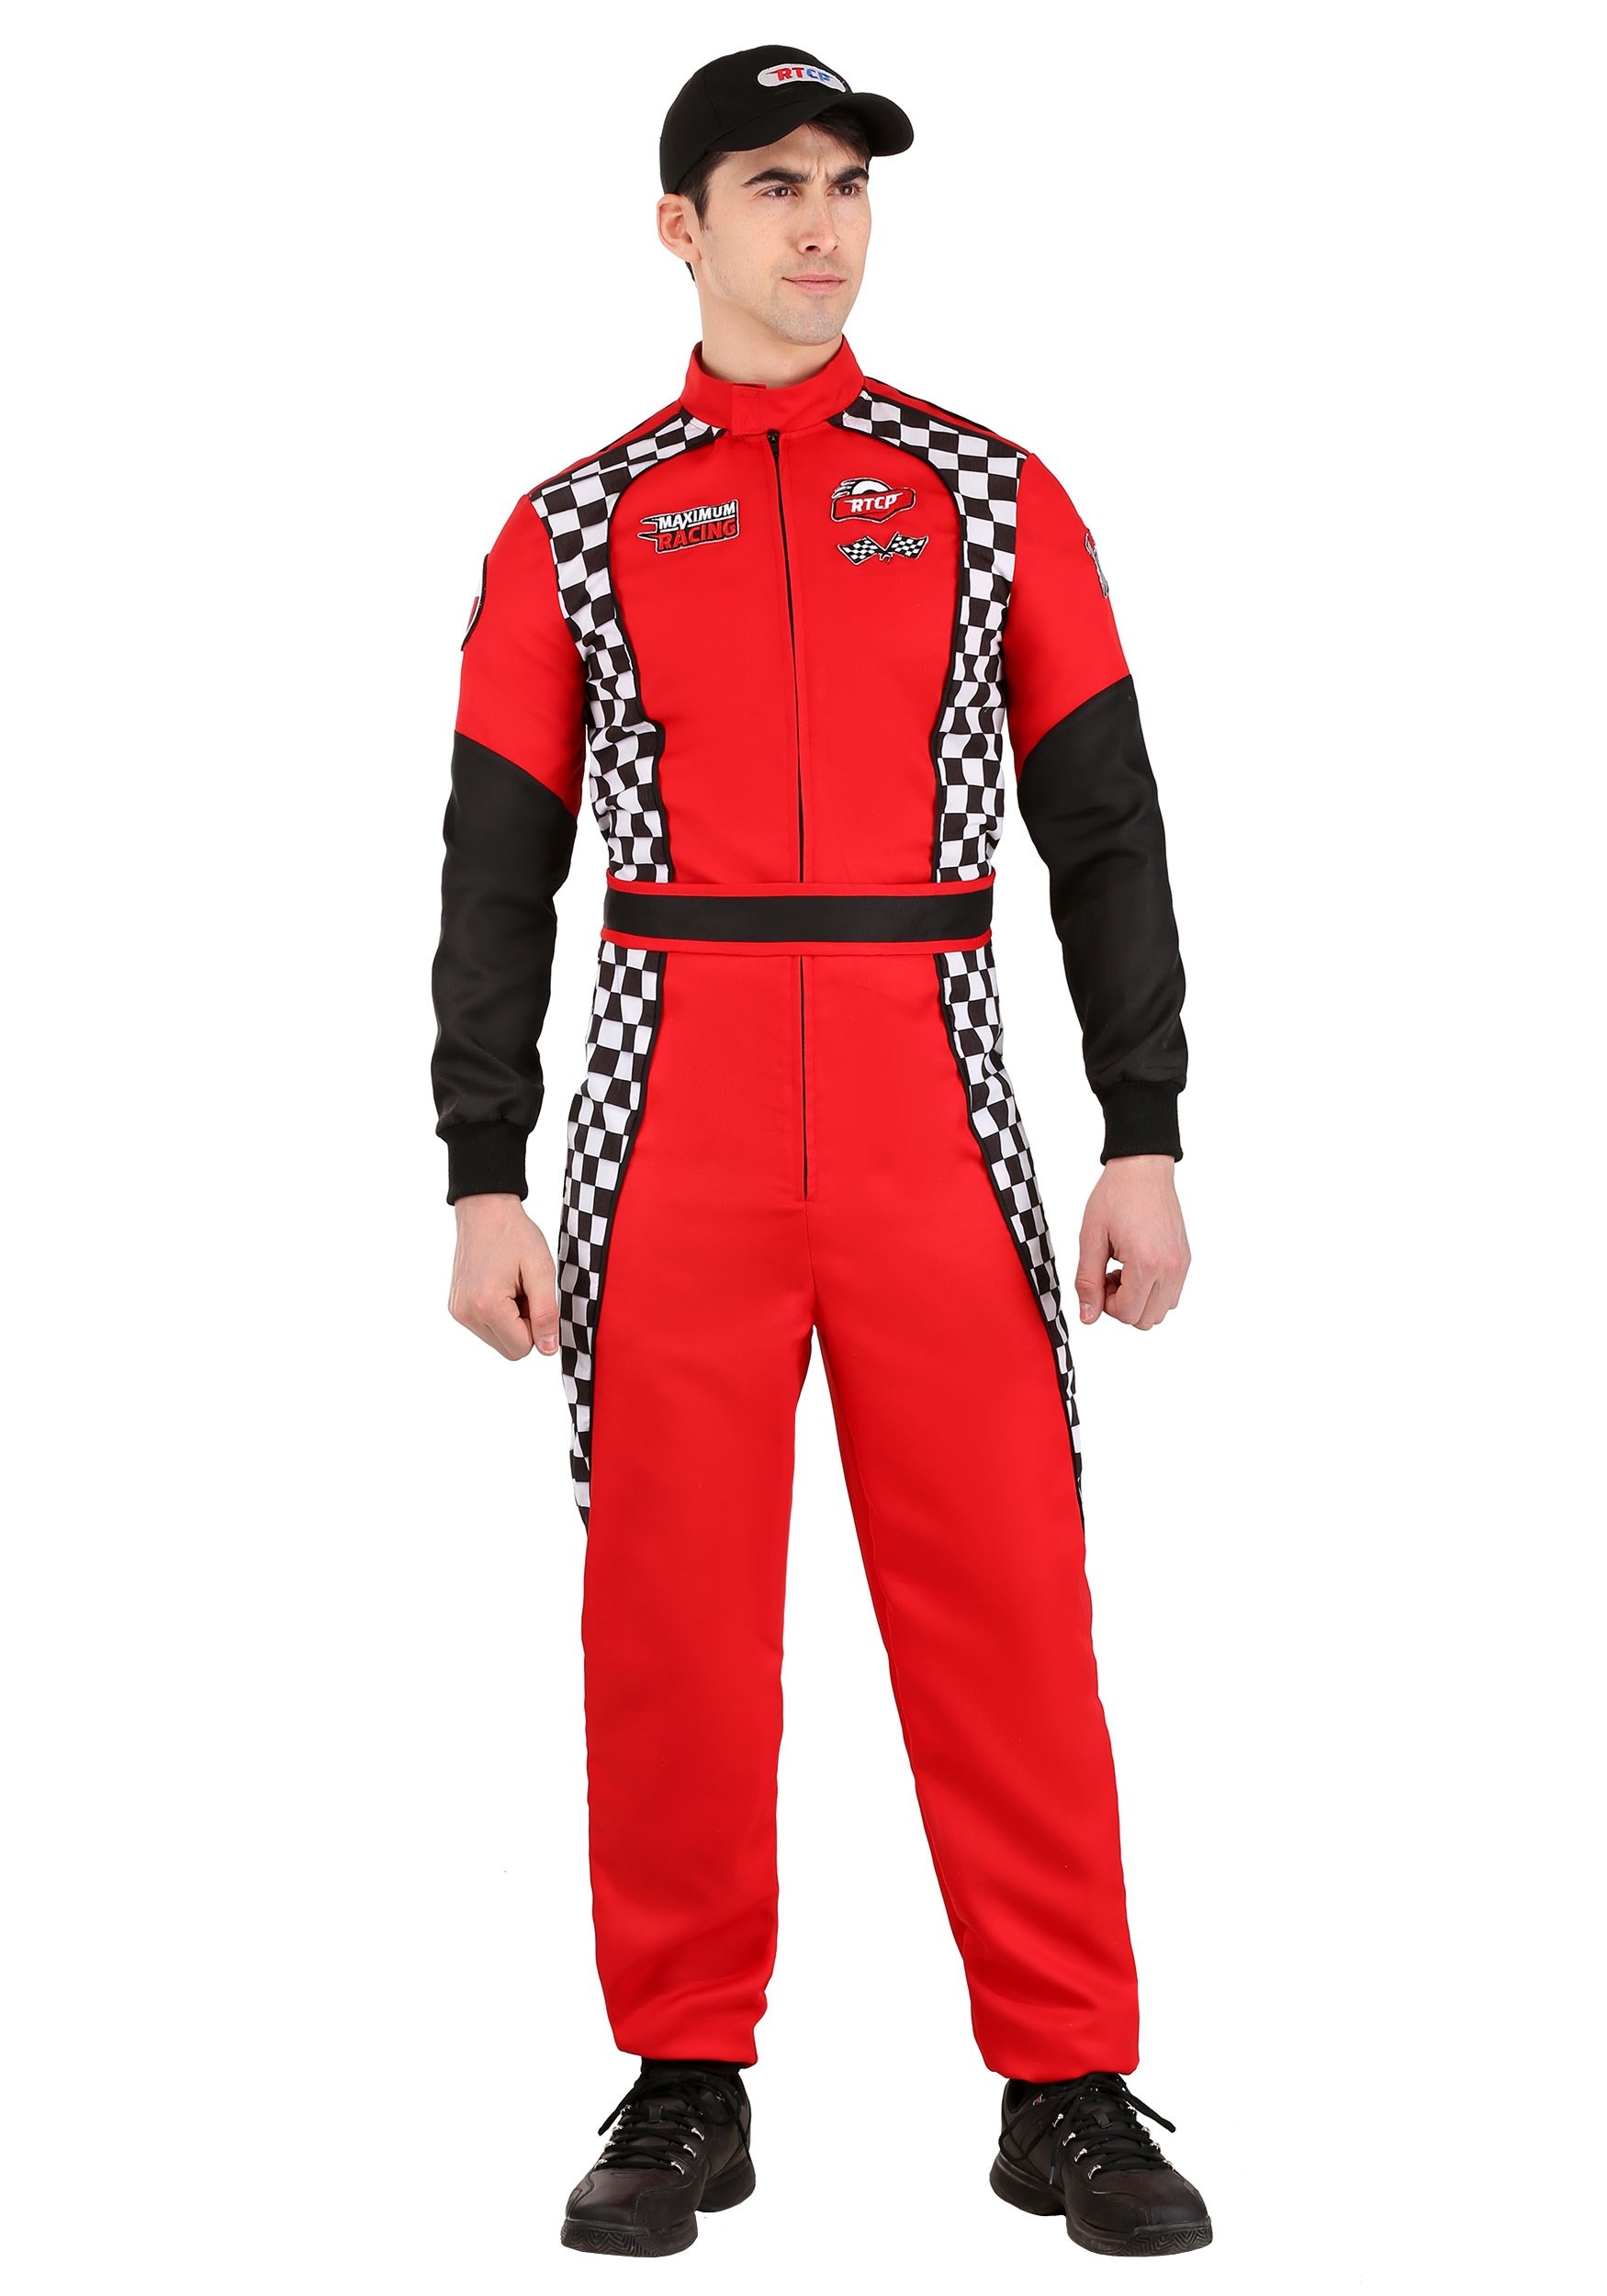 Photos - Fancy Dress Swift FUN Costumes  Racer Costume for Men Black/Red/White FUN1171AD 